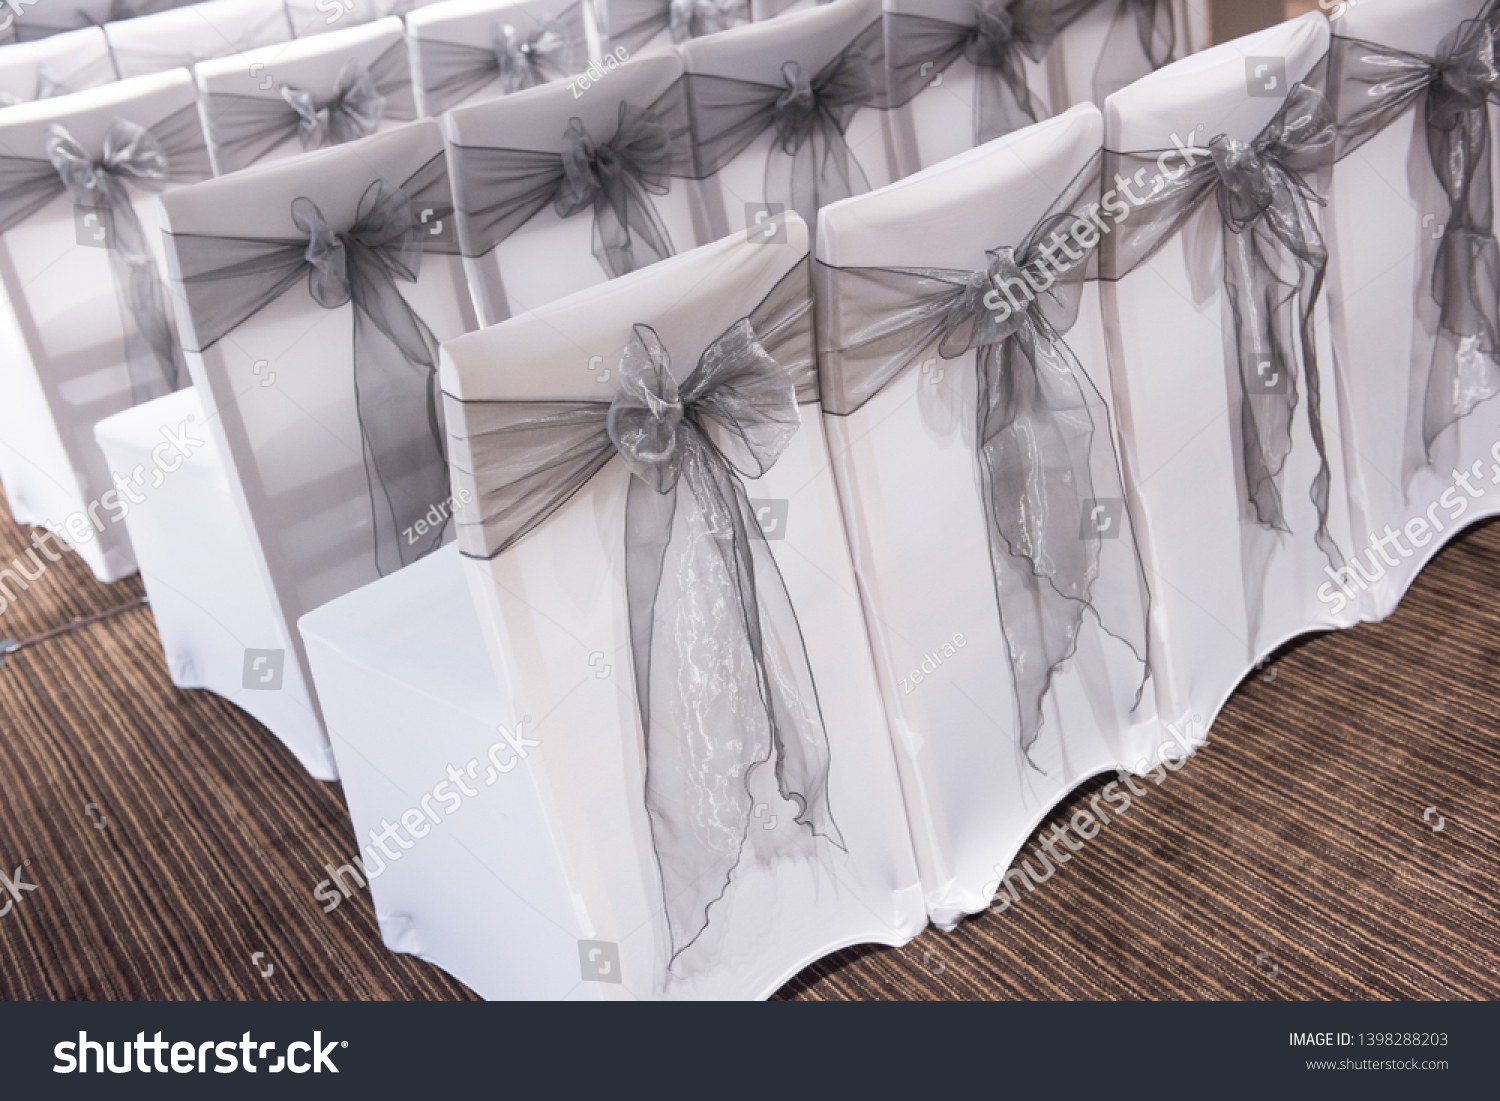 chair covers and bows